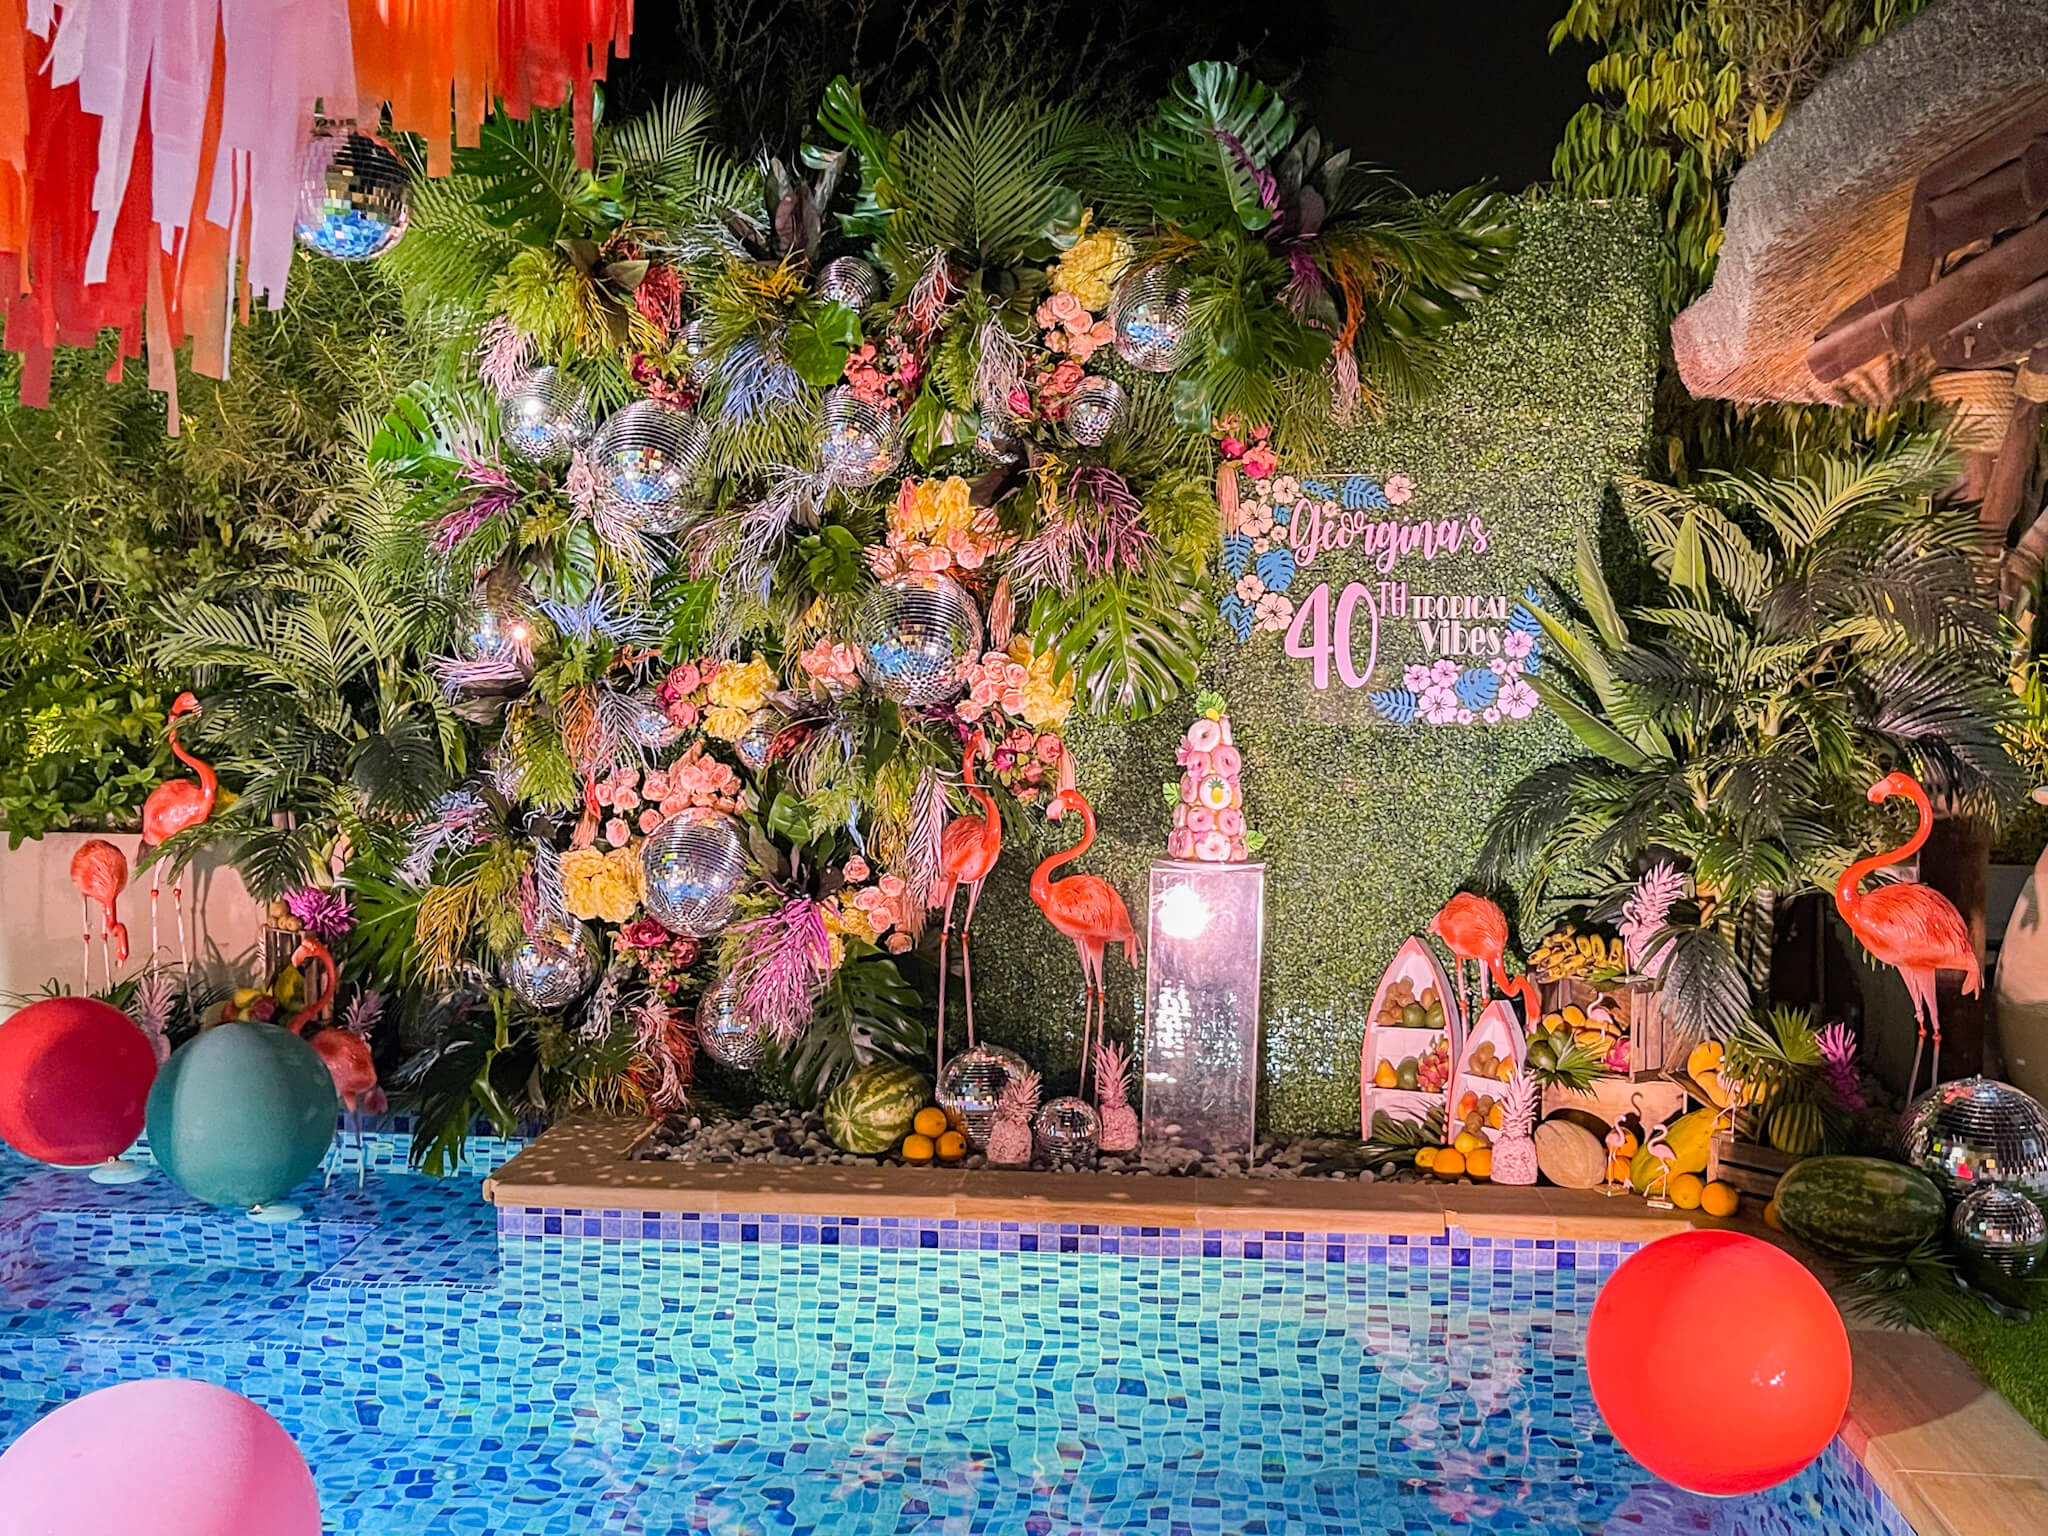 Pool party set up - floral decorations - 7PQRS